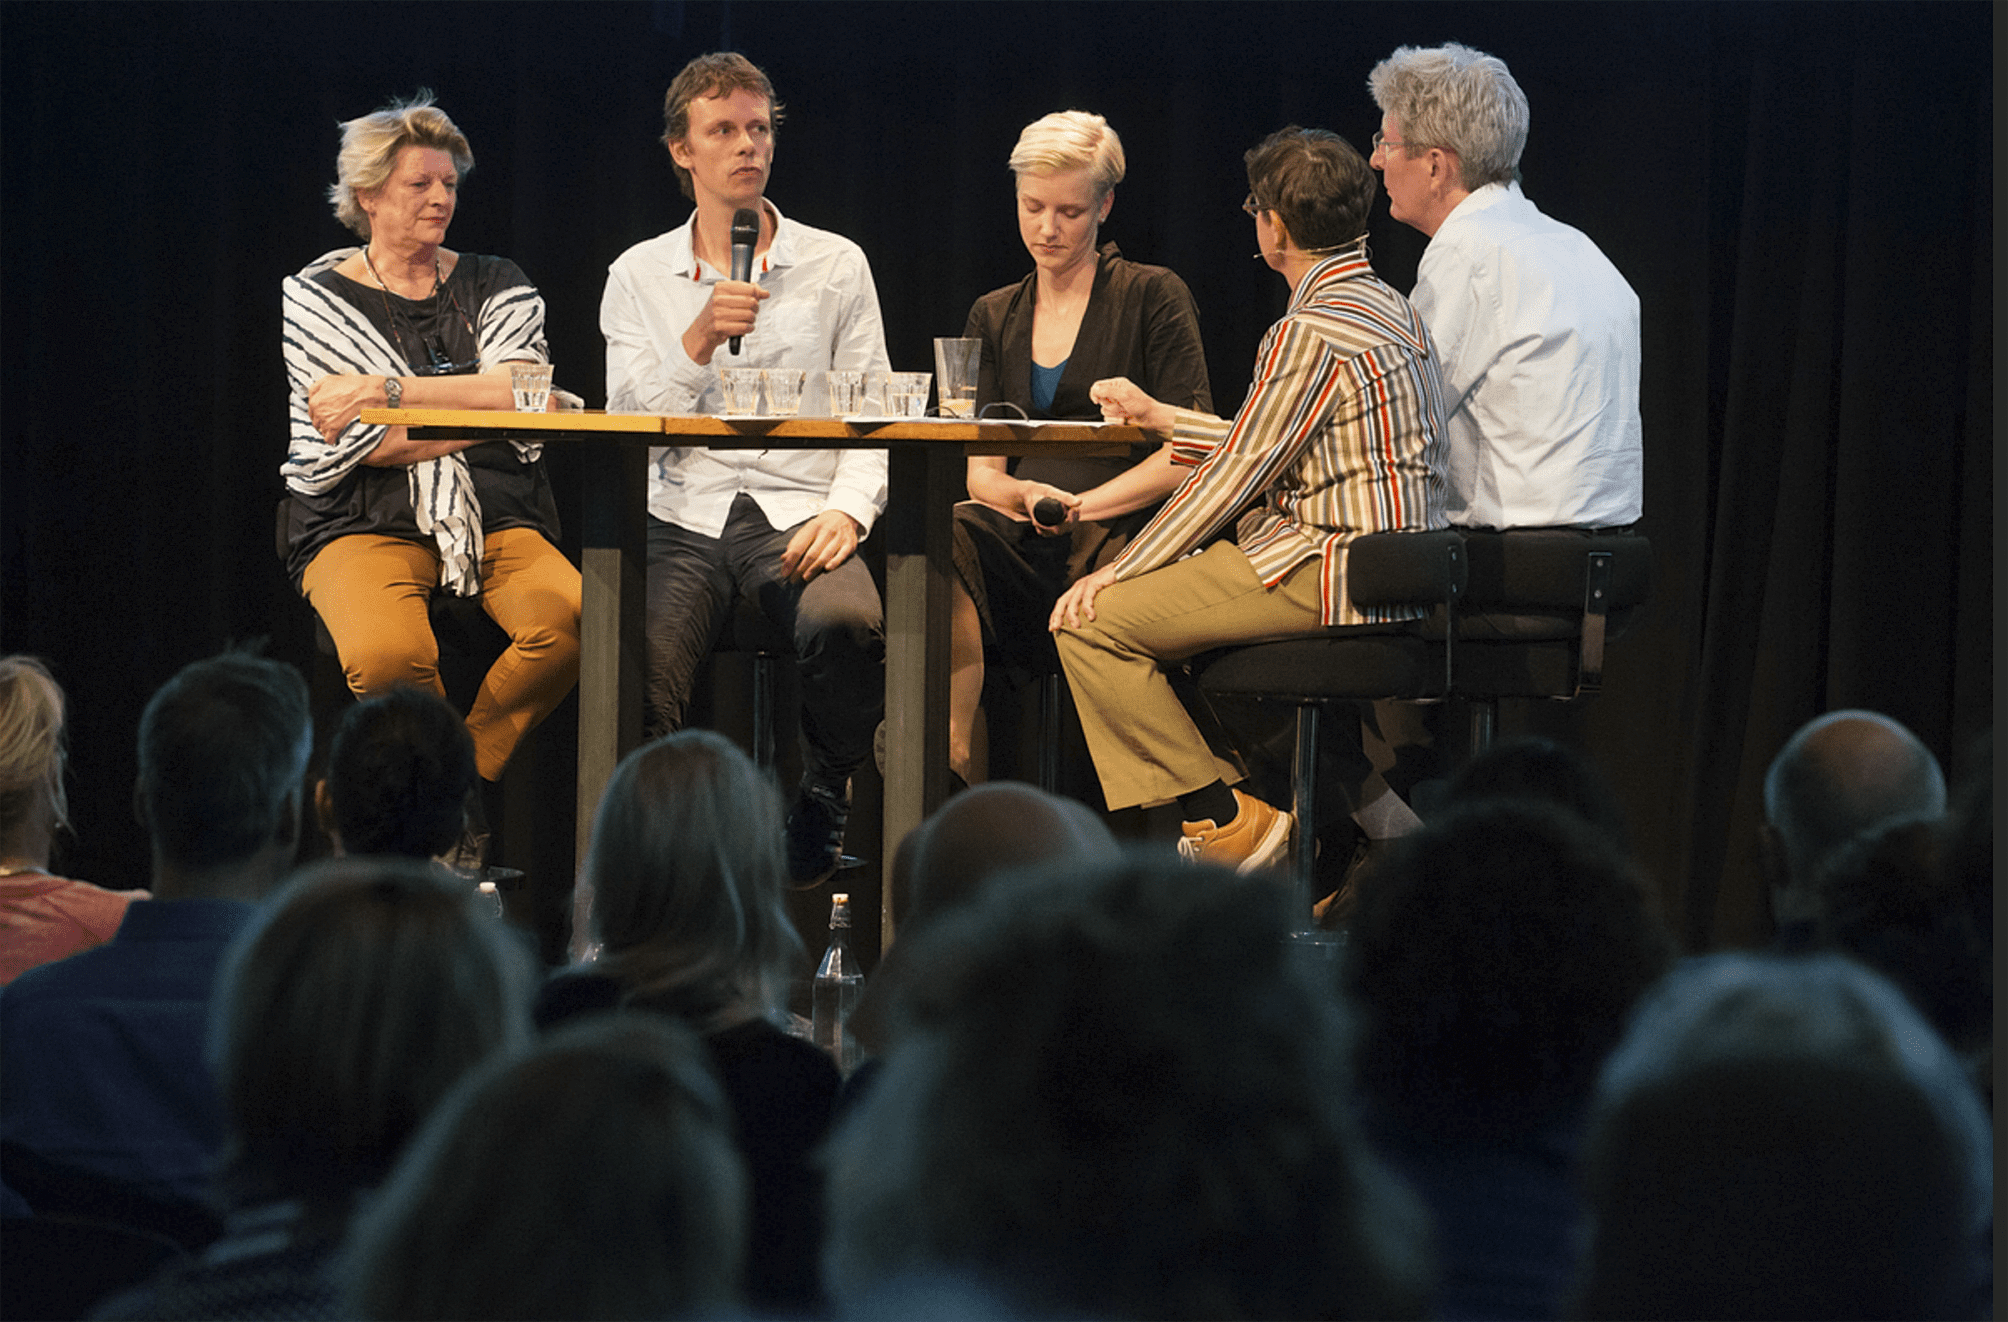 [Left to right] Joint interview with Corinne Noordenbos at The Royal Academy in The Hague, and her successors Rob Hornstra and Lotte Sprengers, at ‘live magazine’ event Donkere Kamer (The Dark Room), in Amsterdam, in May. Image © Bas de Meije